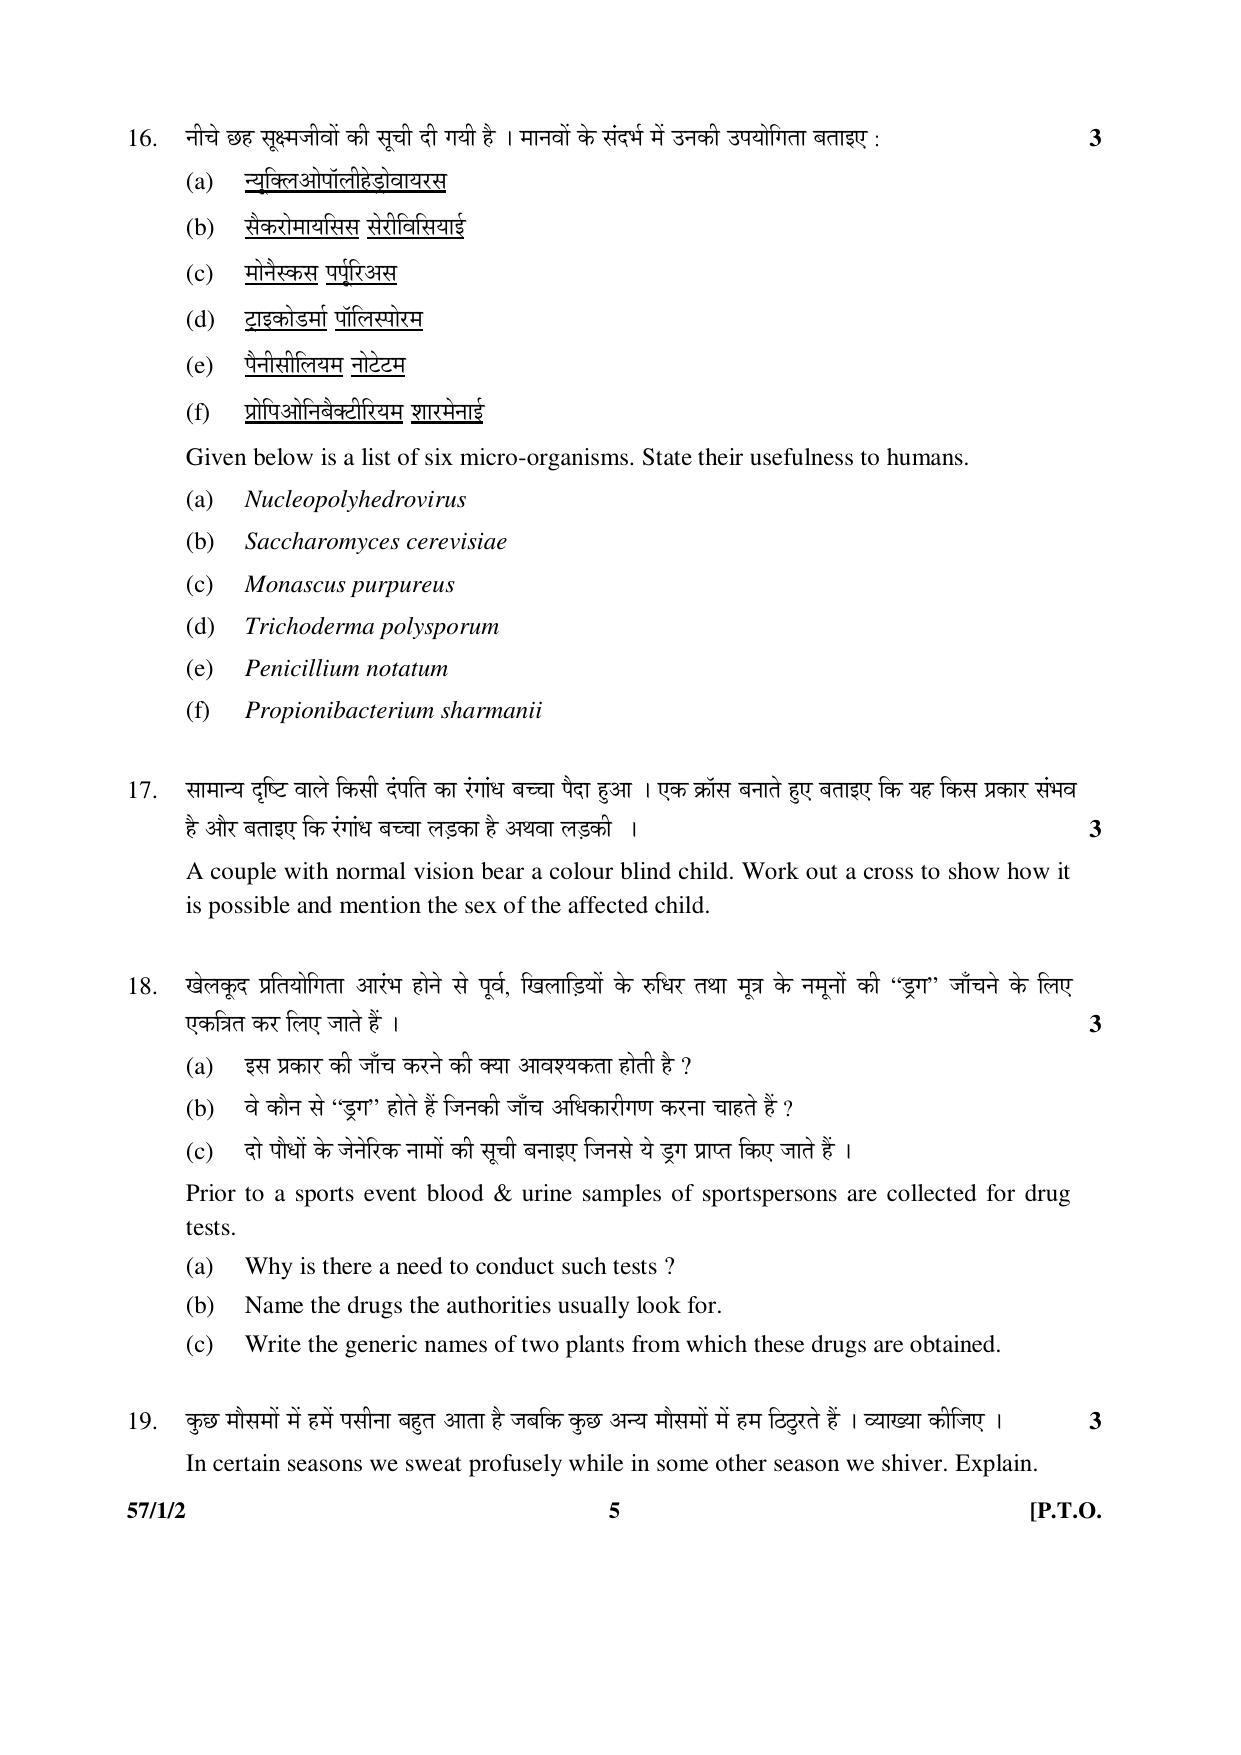 CBSE Class 12 57-1-2 BIOLOGY 2016 Question Paper - Page 5